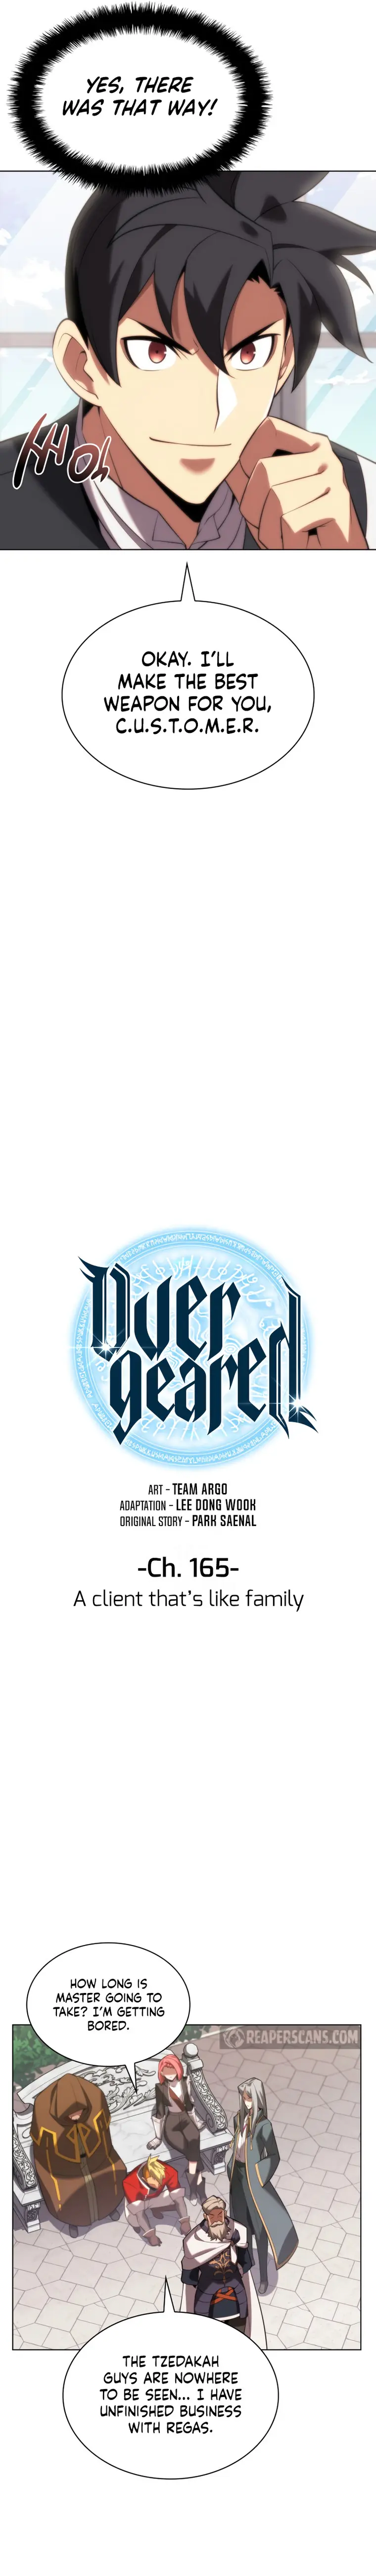 Overgeared - Reaper Scans